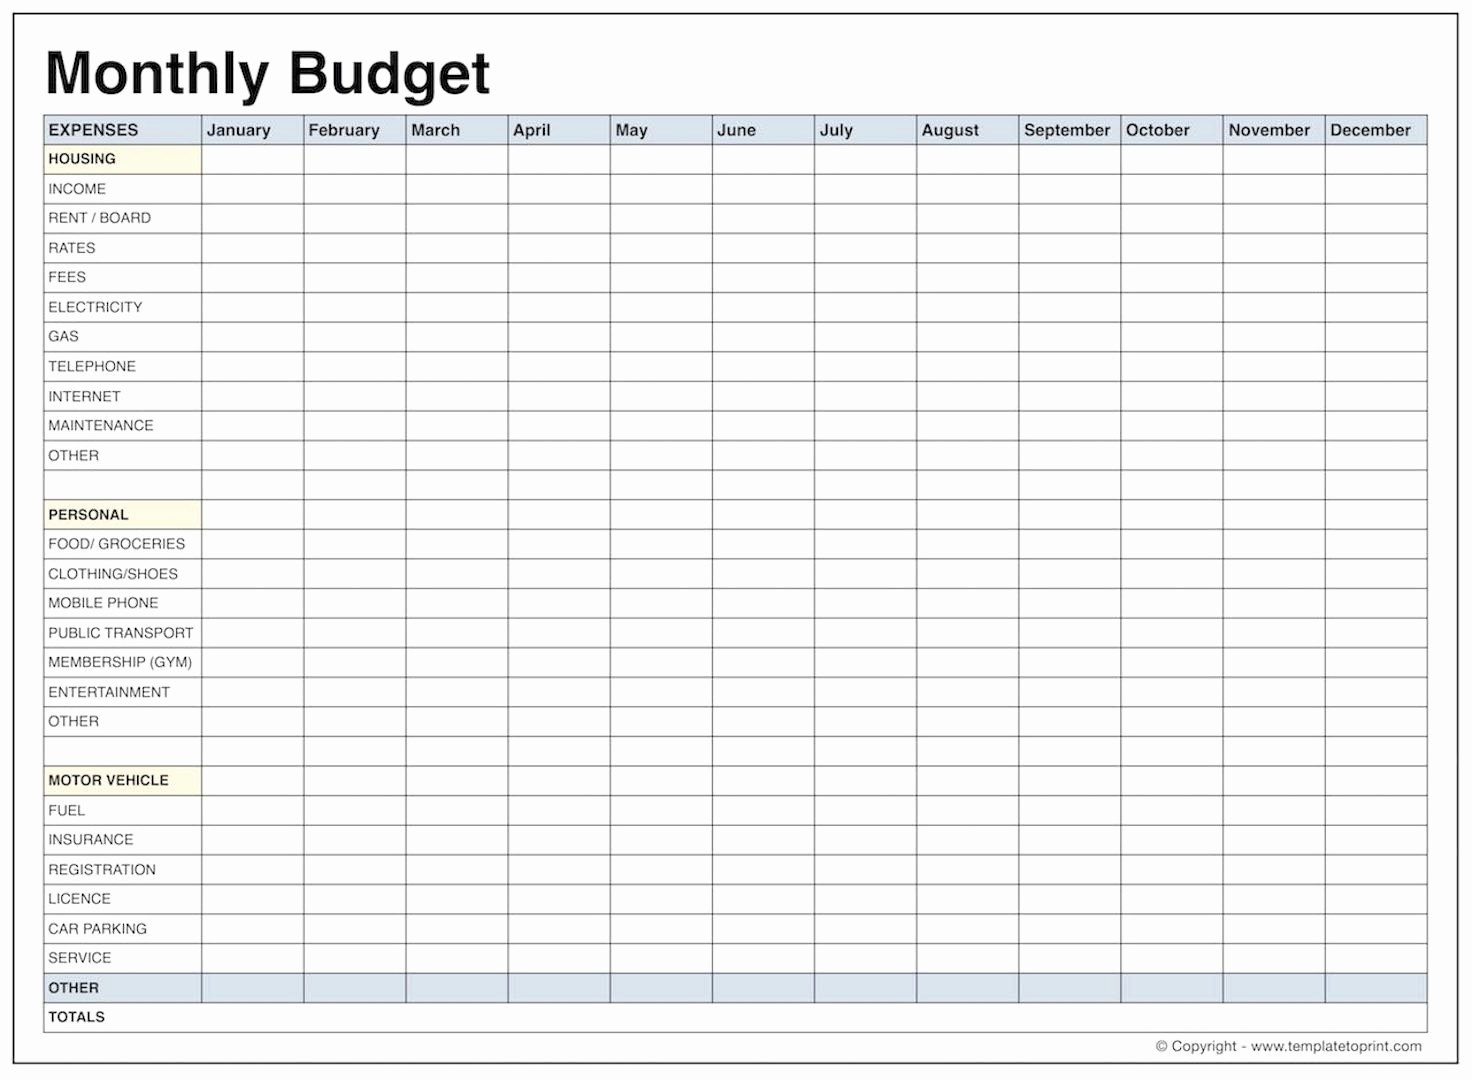 013 Printable Monthly Budget Template Free Best Of Blank Bud Pdf - Free Printable Budget Templates